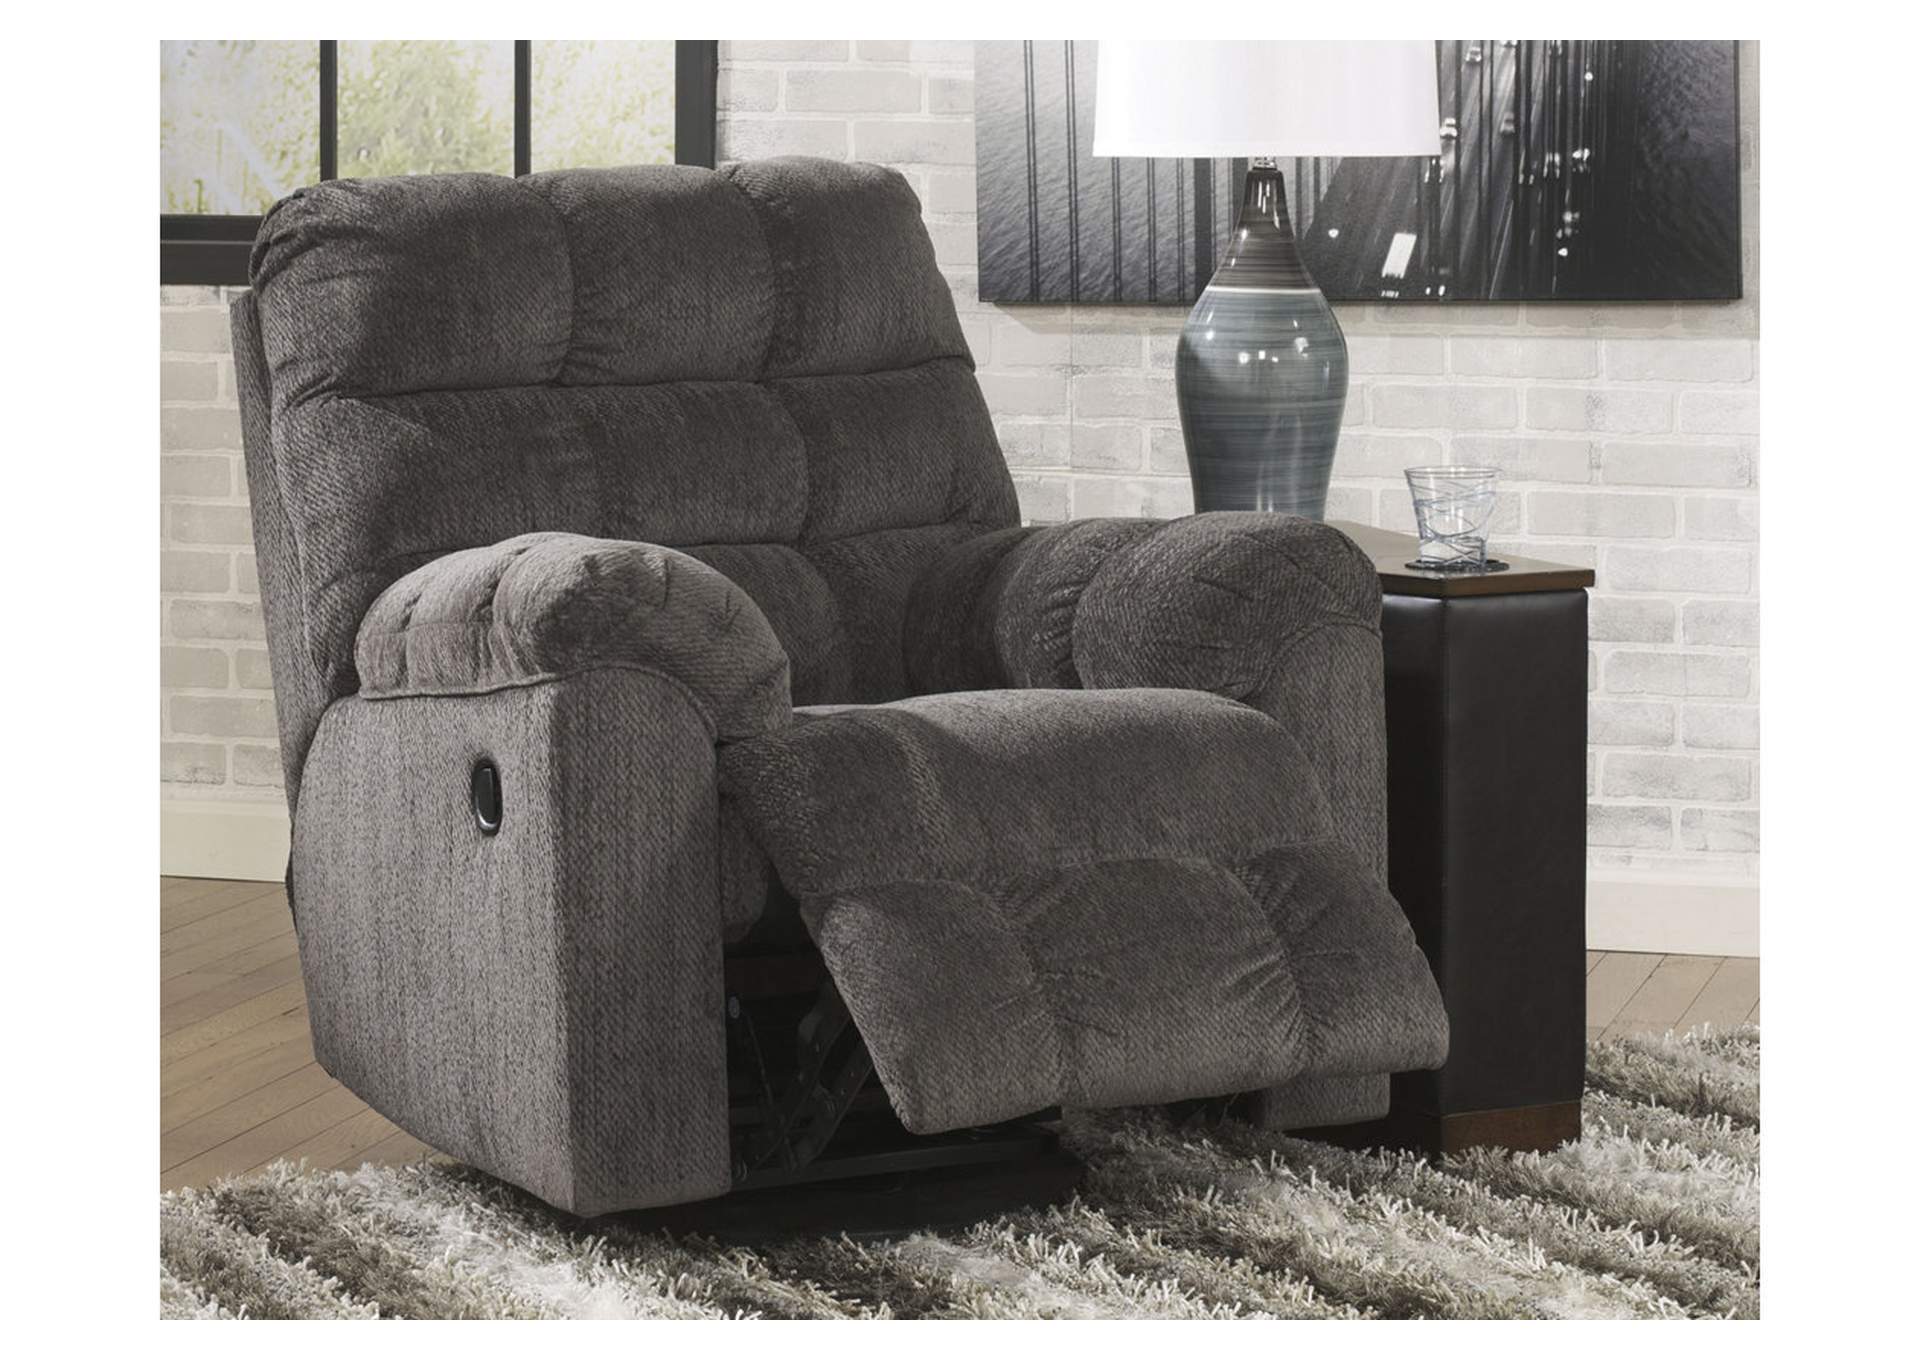 Acieona Reclining Sofa with Recliner,Signature Design By Ashley